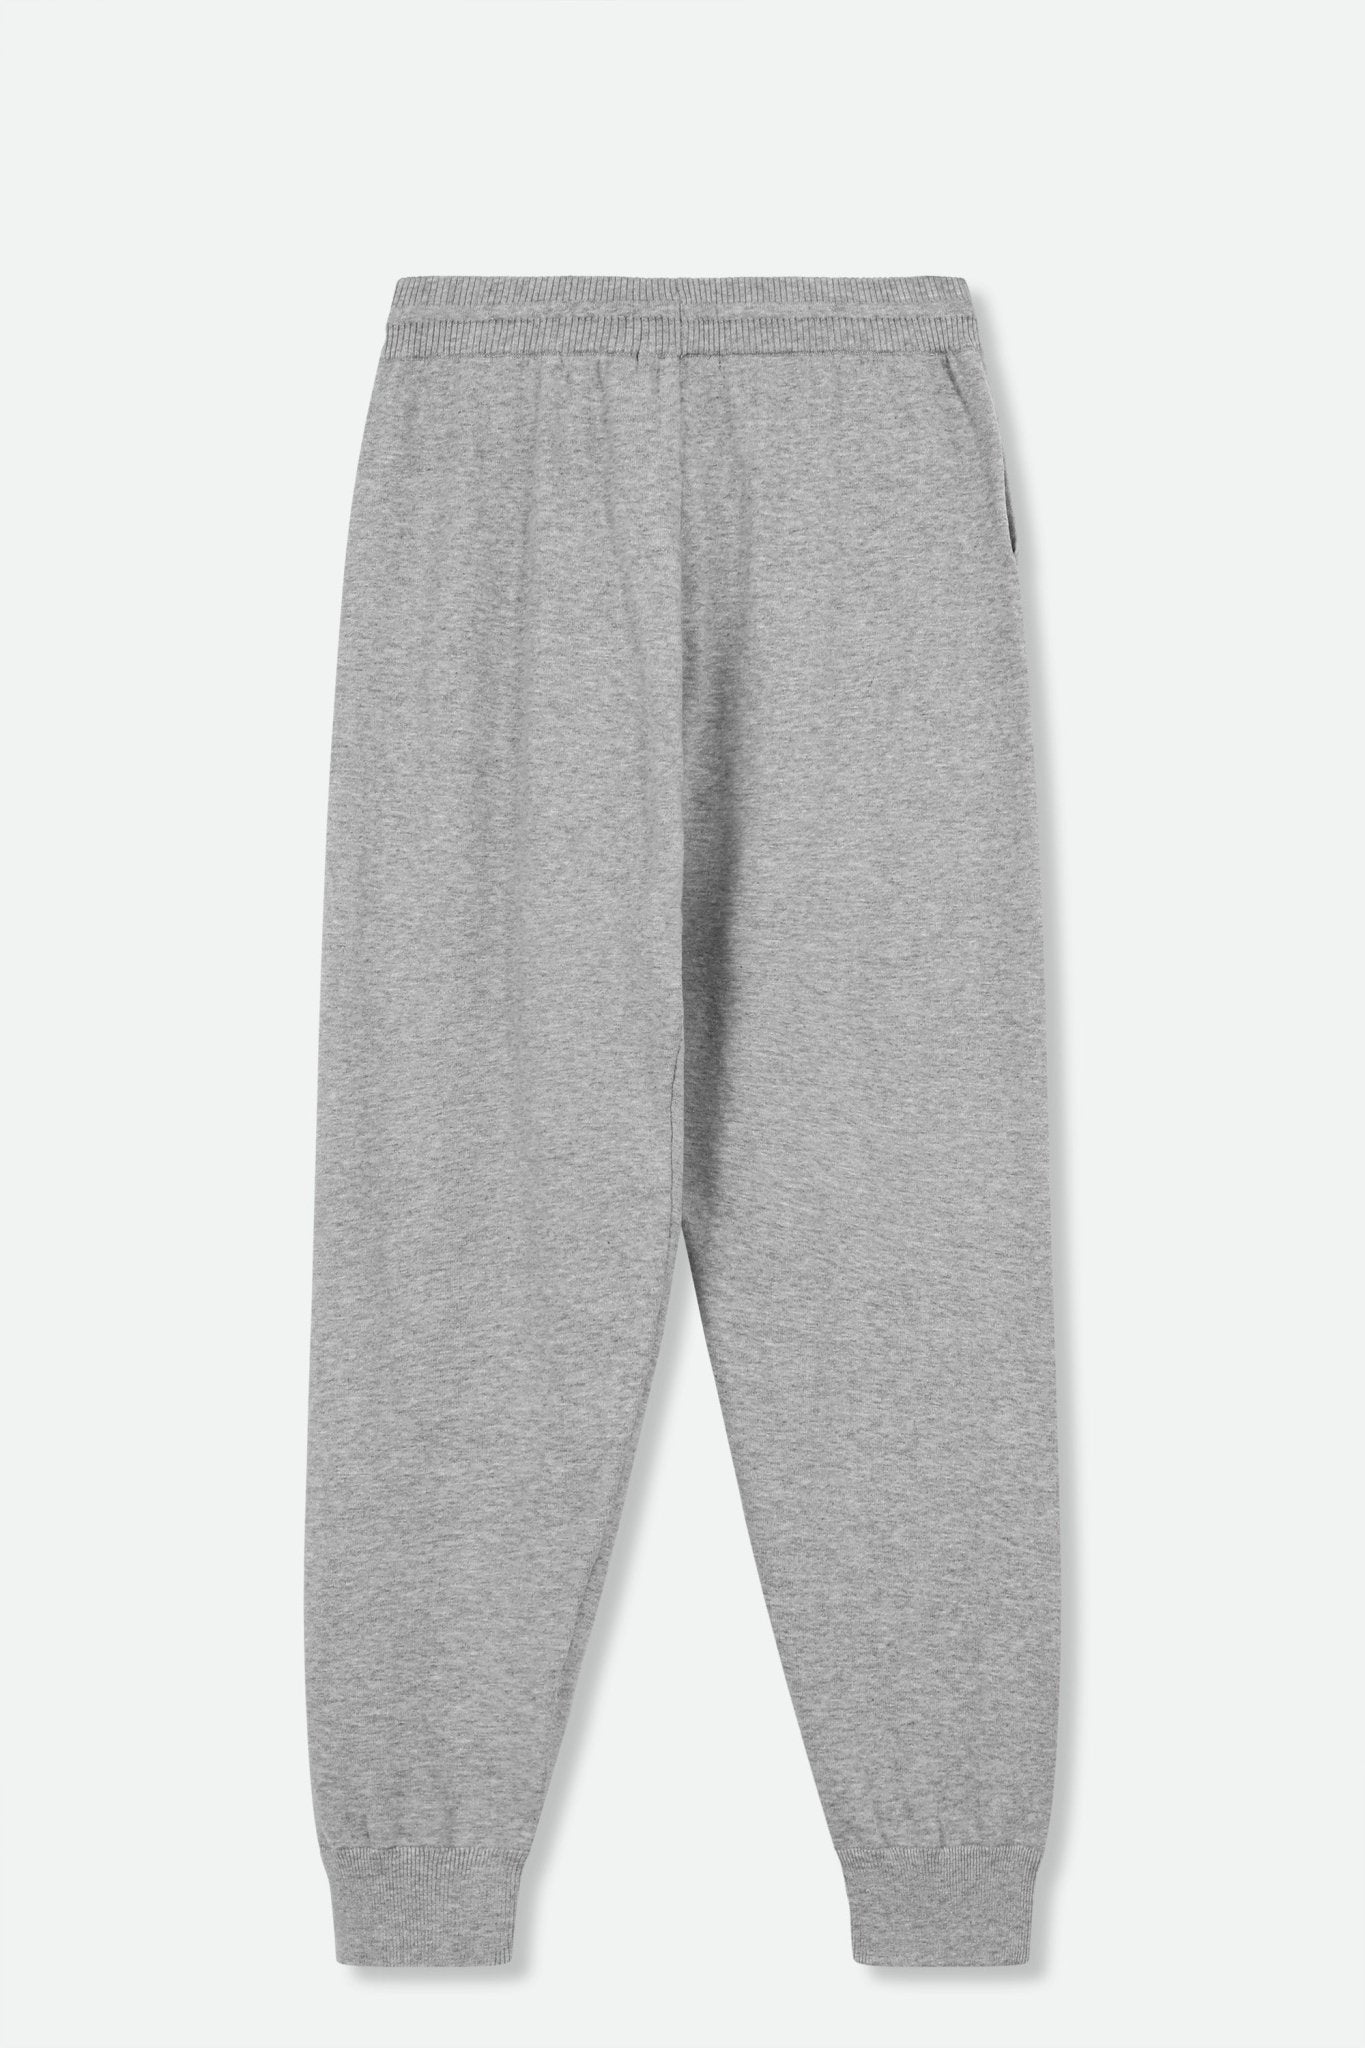 JOEY JOGGER PANT IN KNIT PIMA COTTON STRETCH IN HEATHER MEDIUM GREY - Jarbo